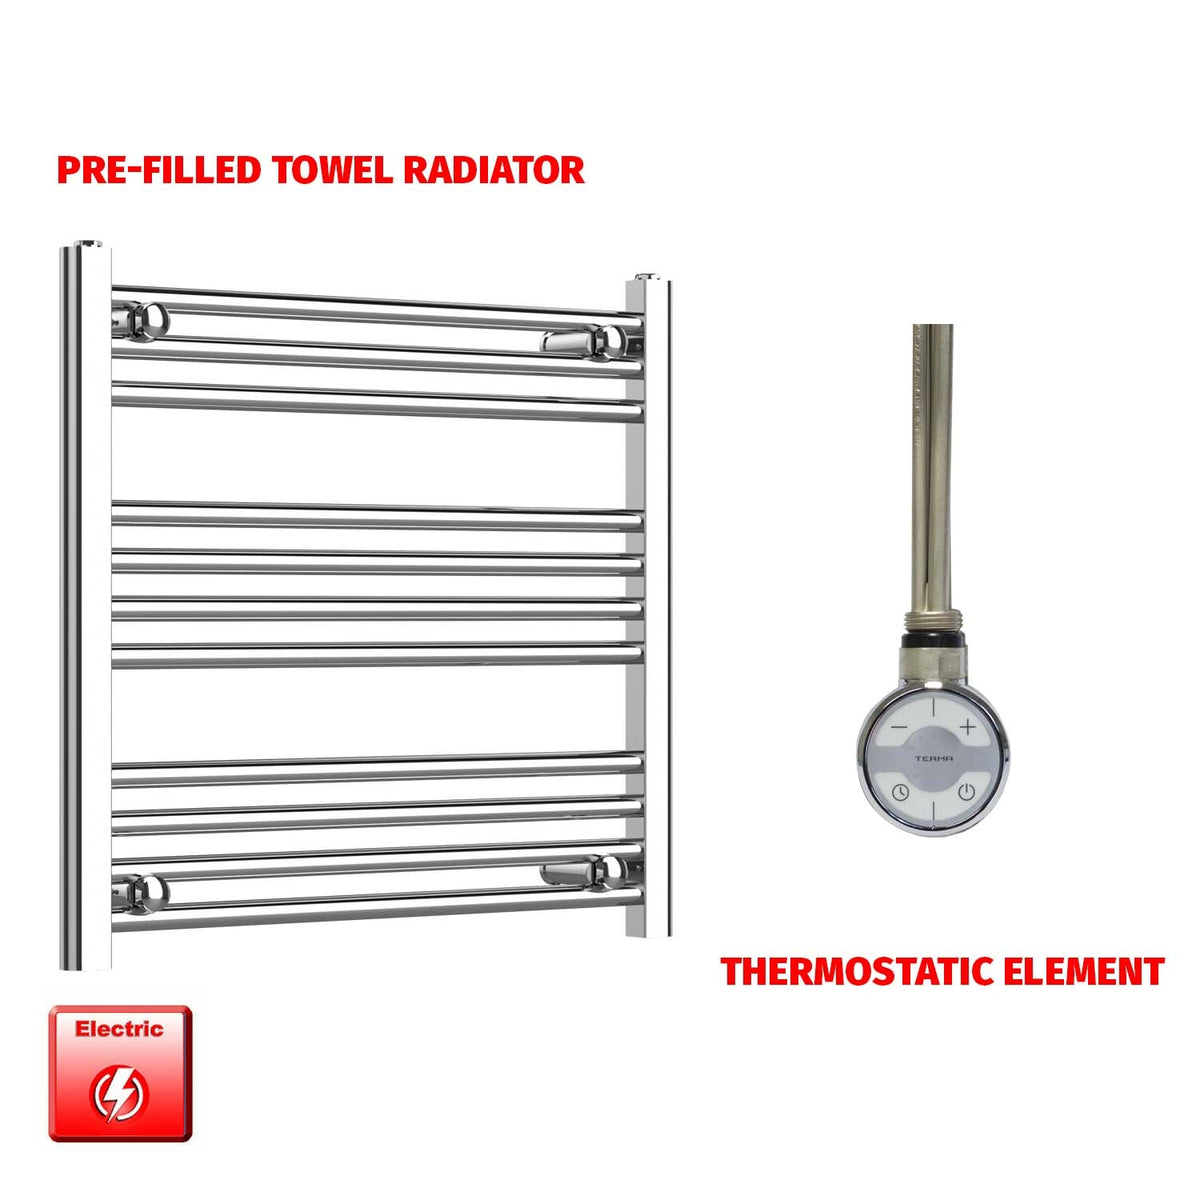 600 x 650 Pre-Filled Electric Heated Towel Radiator Straight Chrome